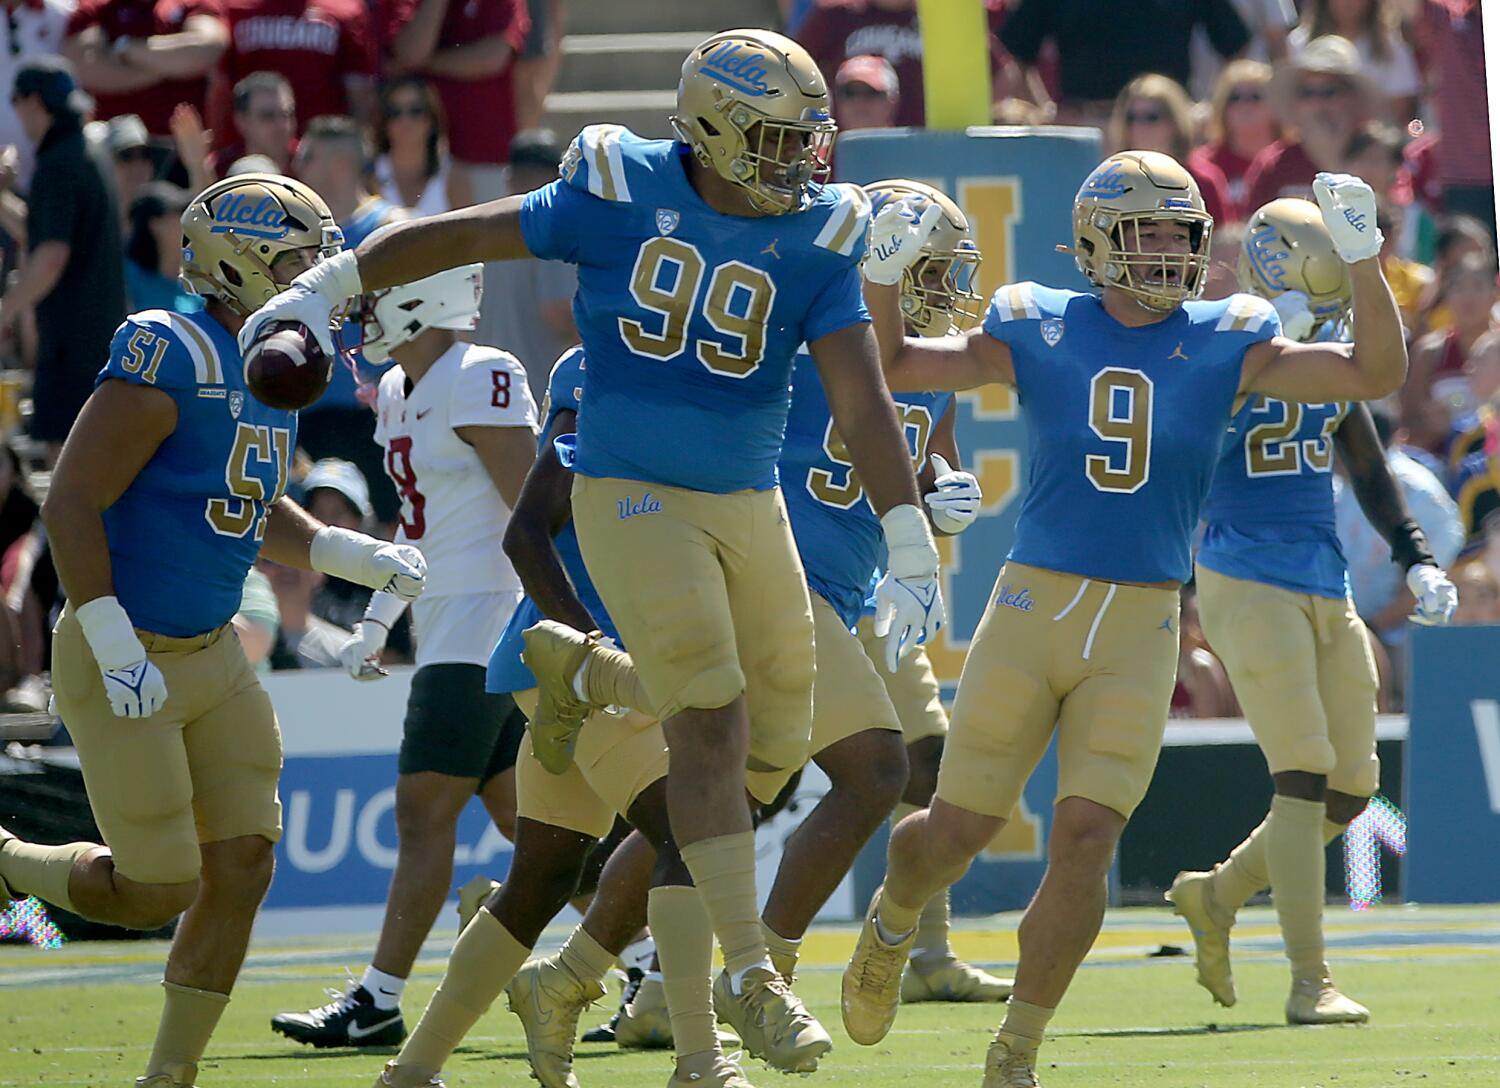 Late bloomers, comebacks and surprises: The unlikely rise of UCLA's defense